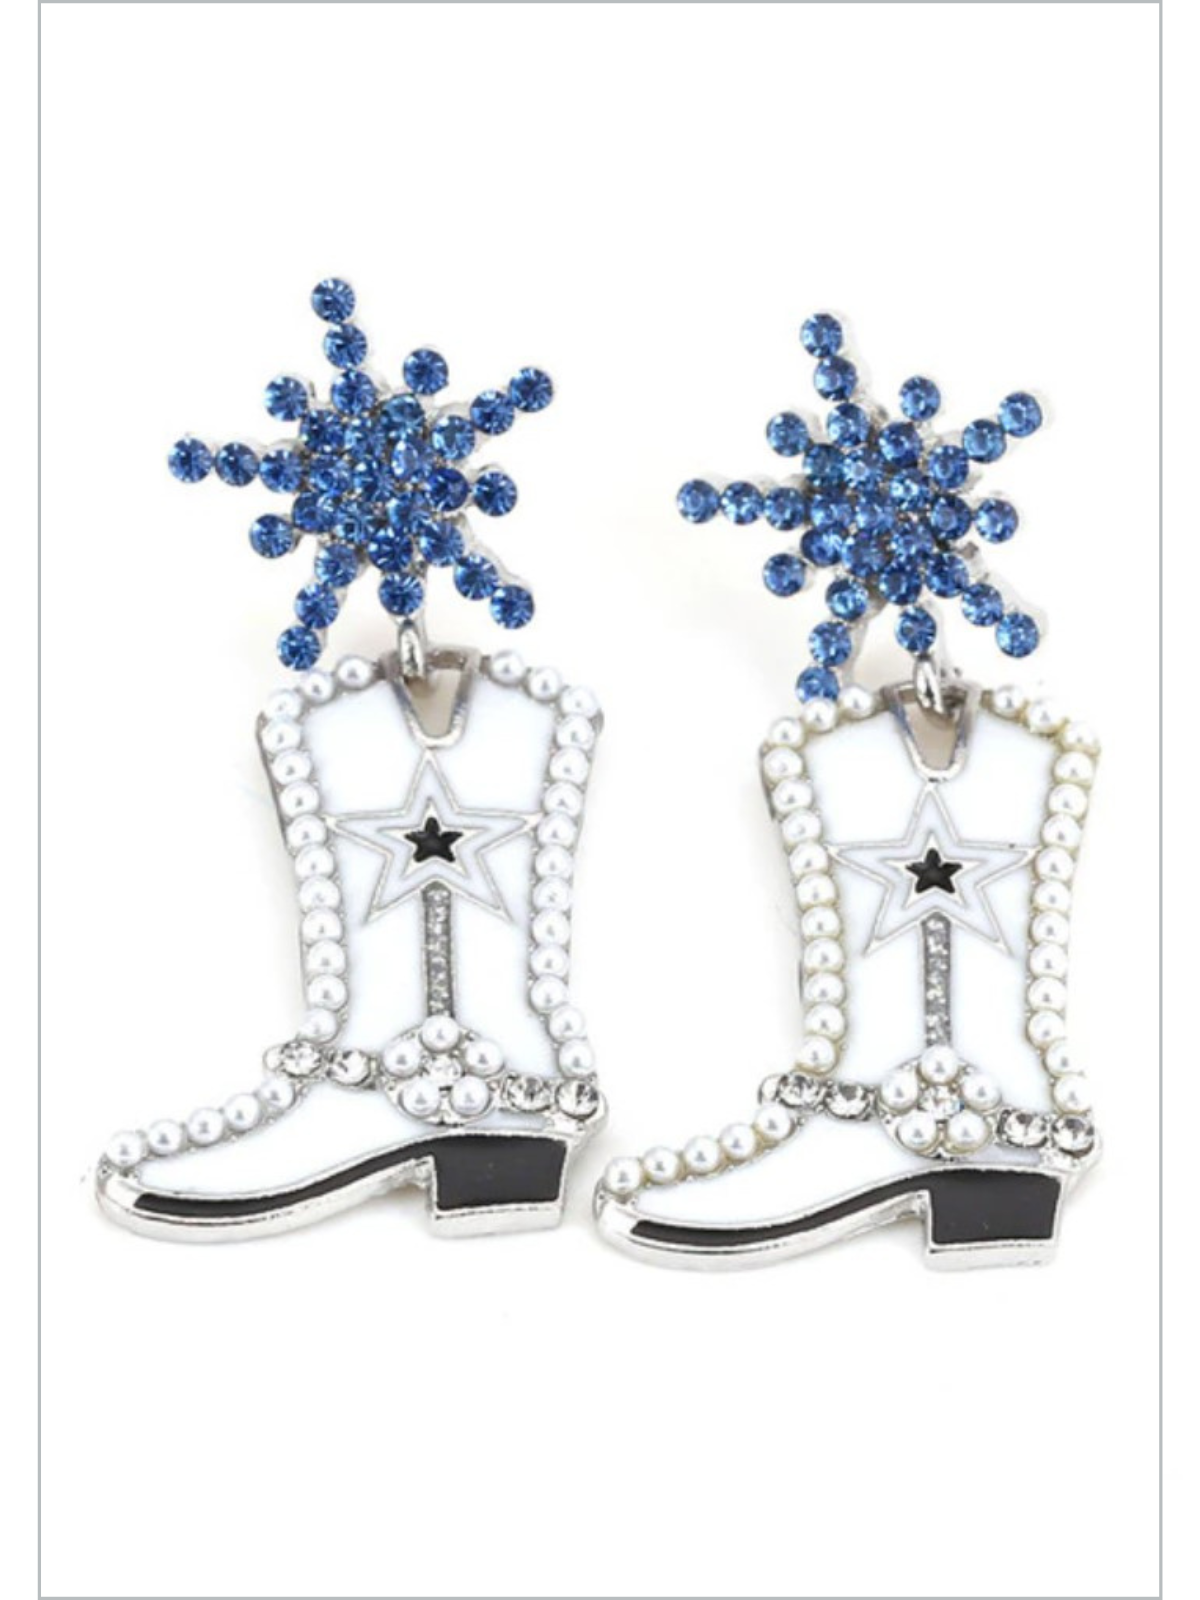 Rodeo Star Studded Boots Cowgirl Earrings